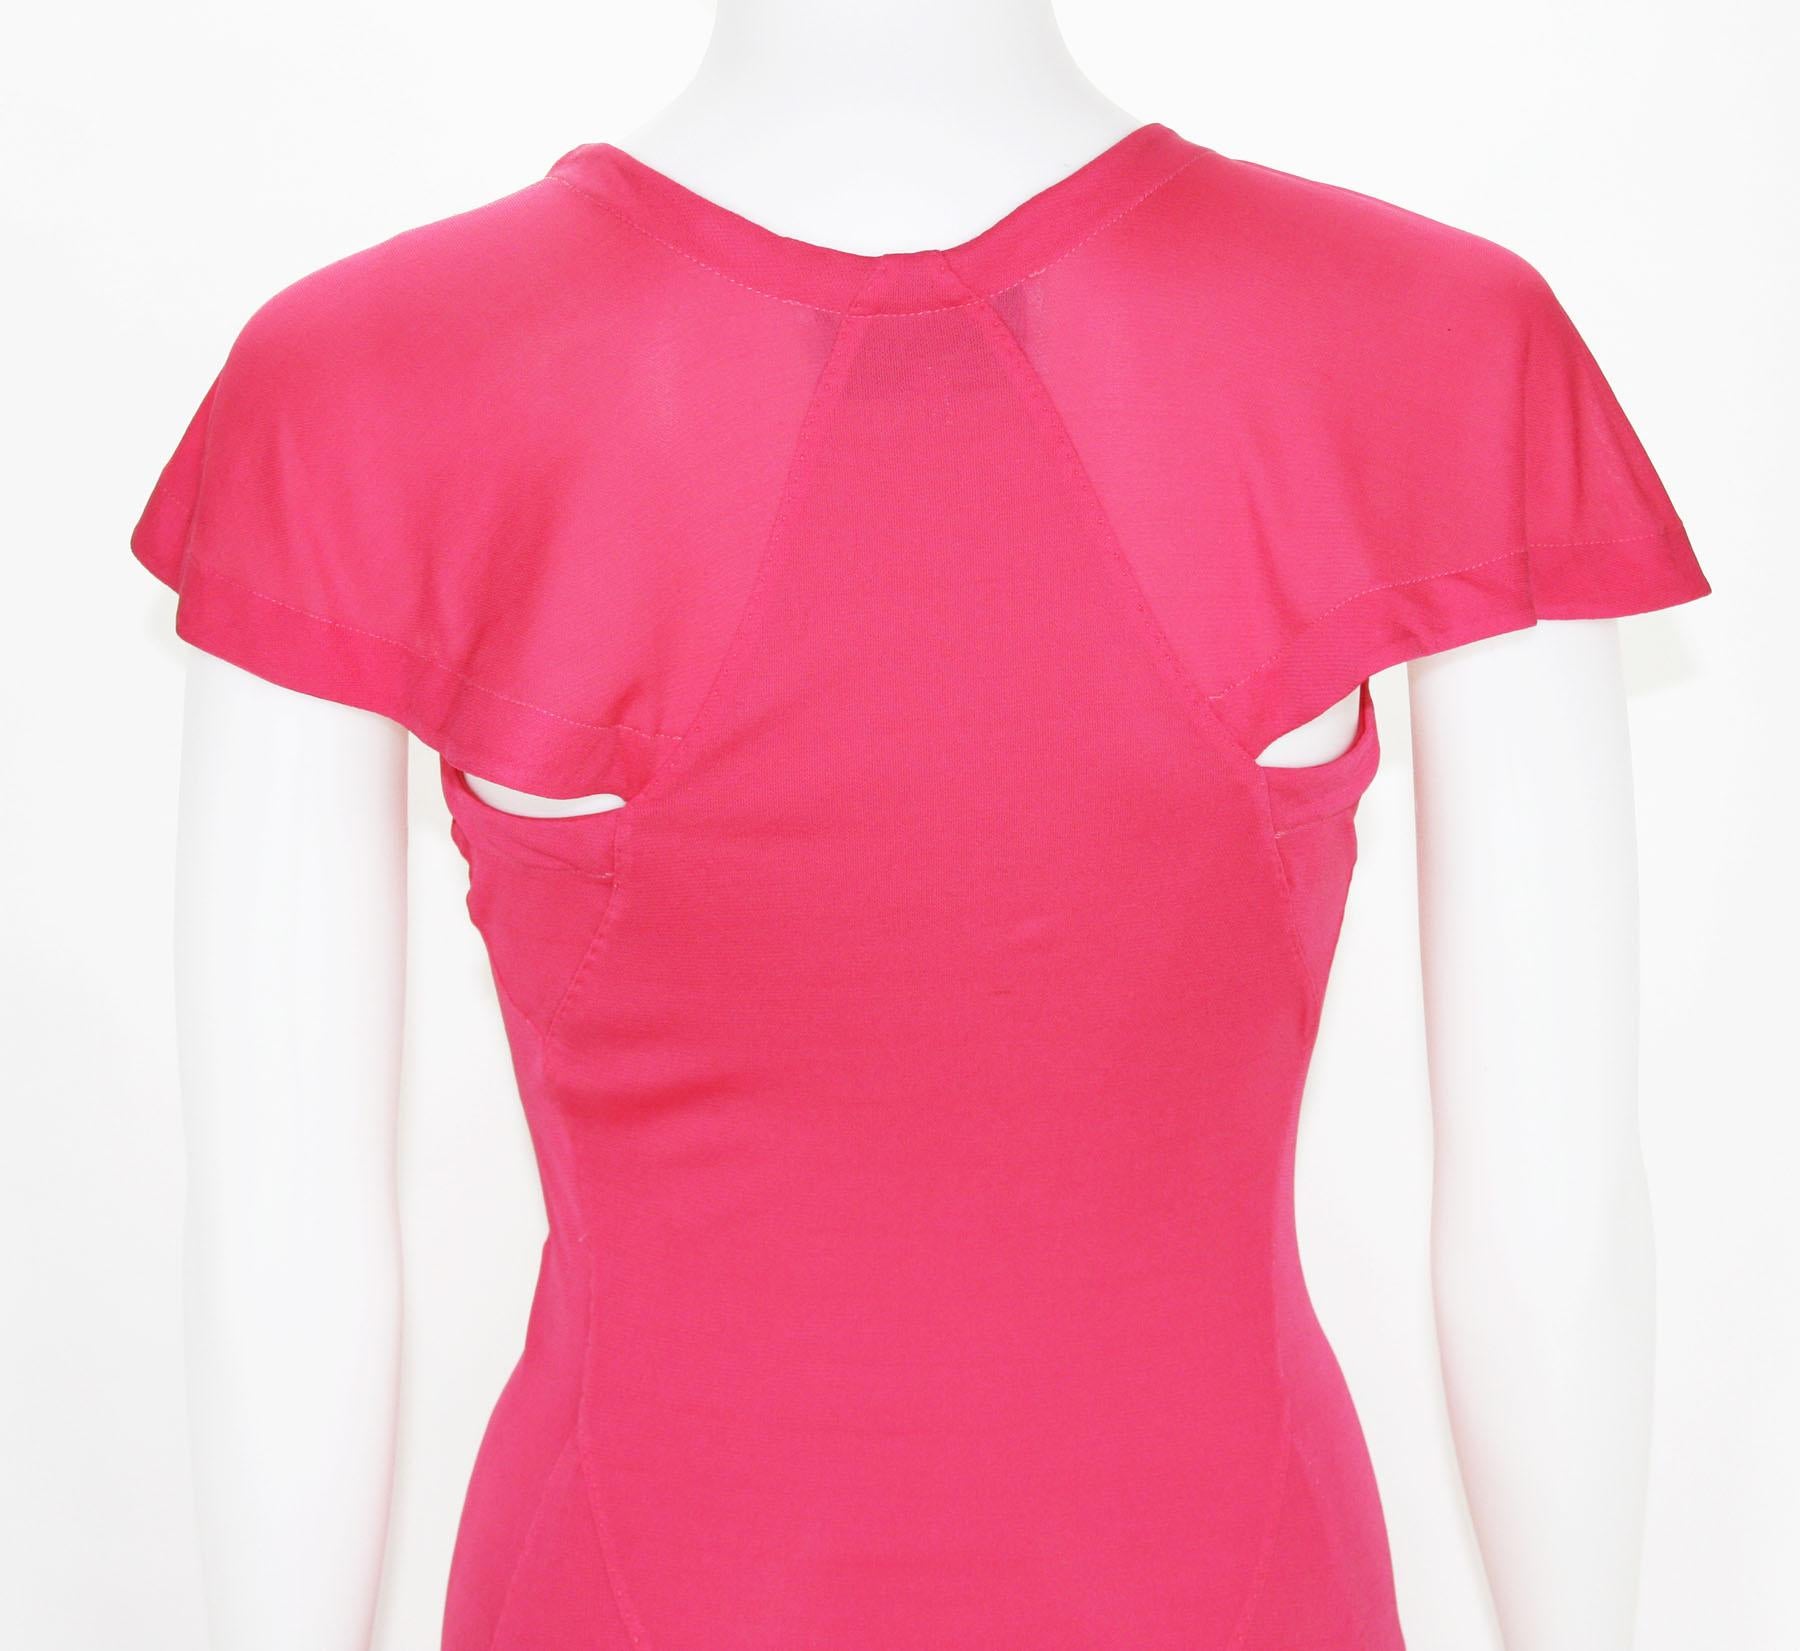 Women's Tom Ford for Yves Saint Laurent F/W 2004 Collection Pink Jersey Dress size S For Sale